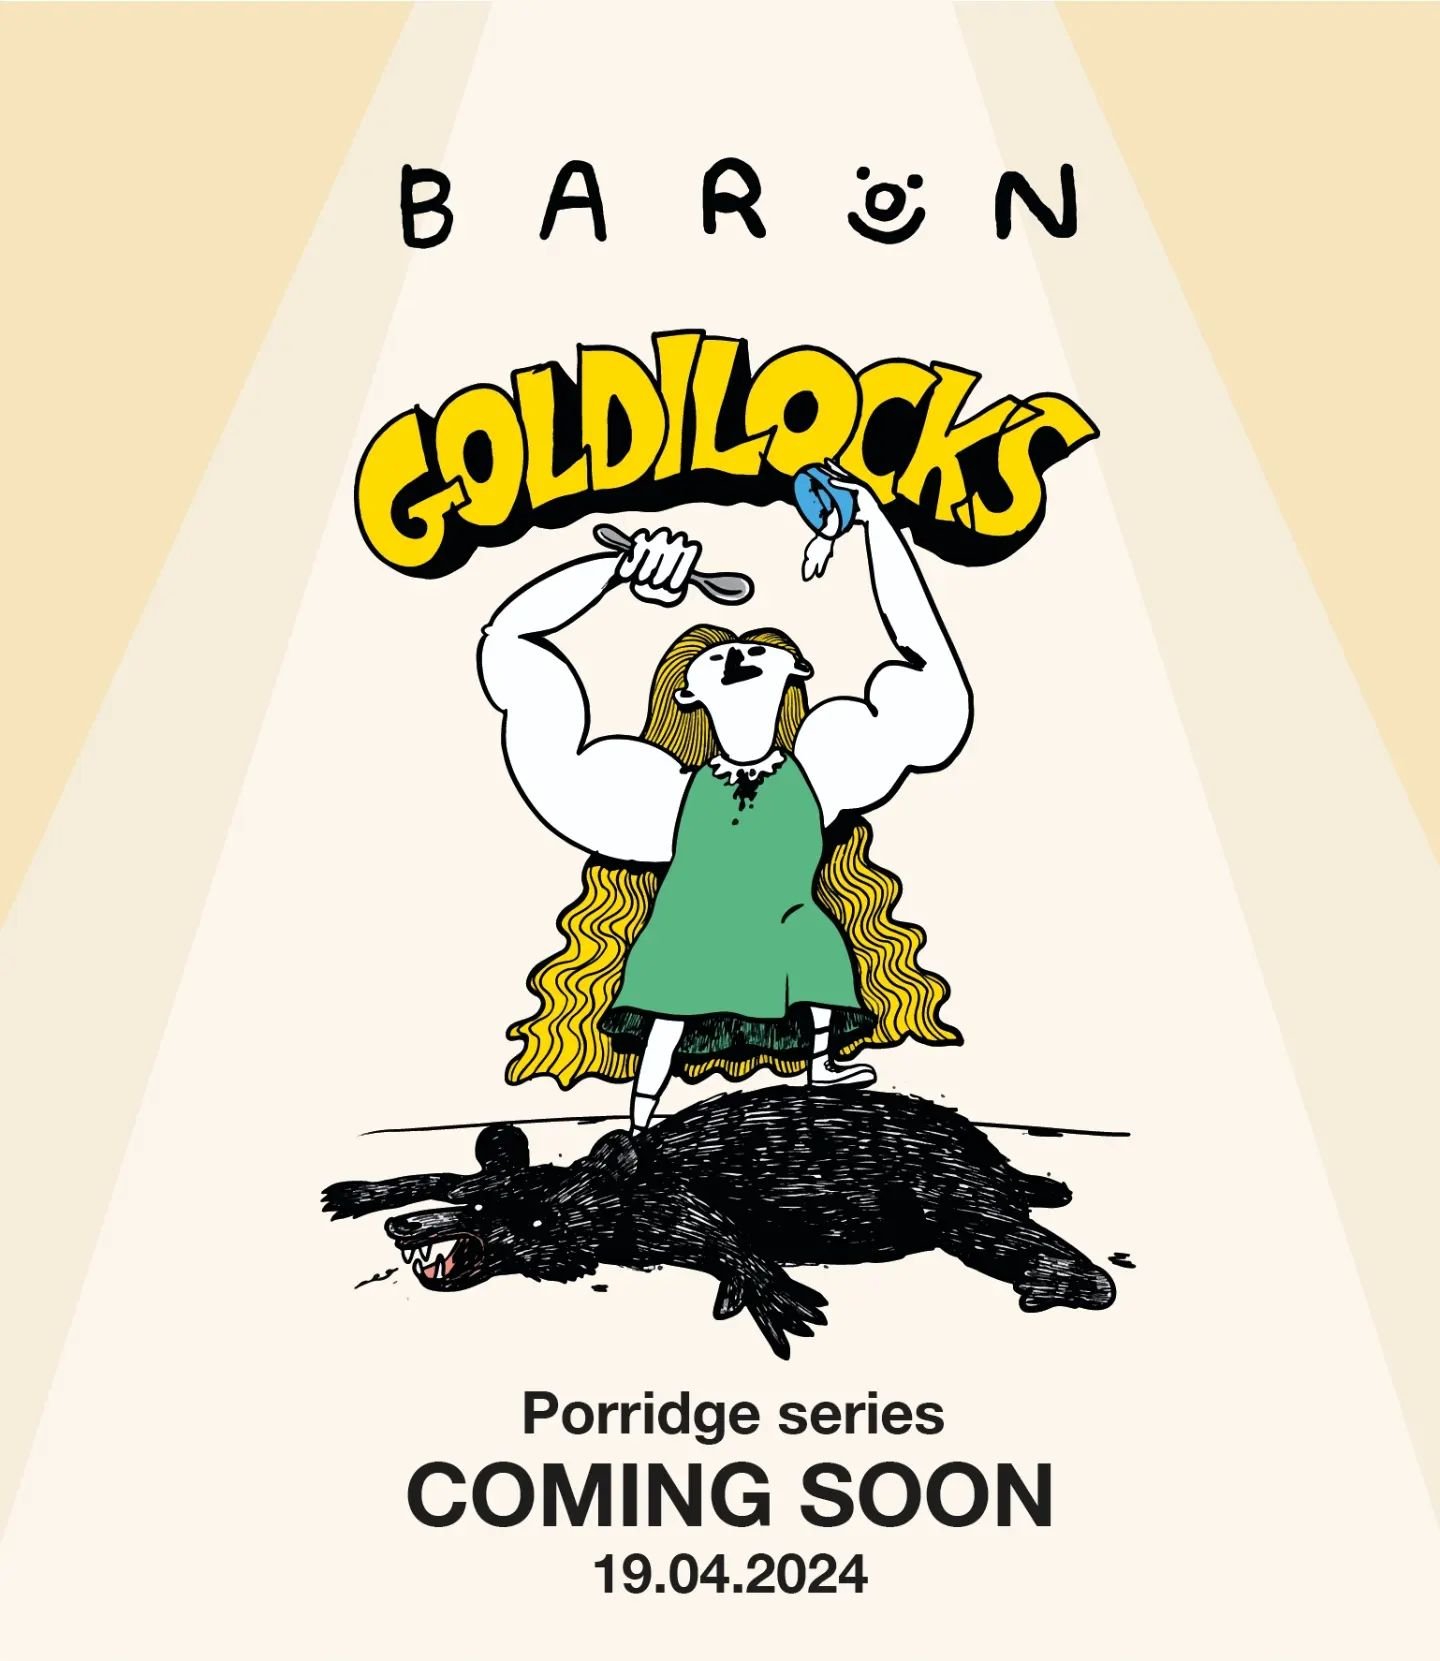 Very excited to confirm The Hop Box as one of the launch venues for The Goldilocks porridge series by @baron.brewing, this Friday 19th April.

We'll be showcasing the very best of Jack's craft in this oat-heavy limited release - blending the finest h